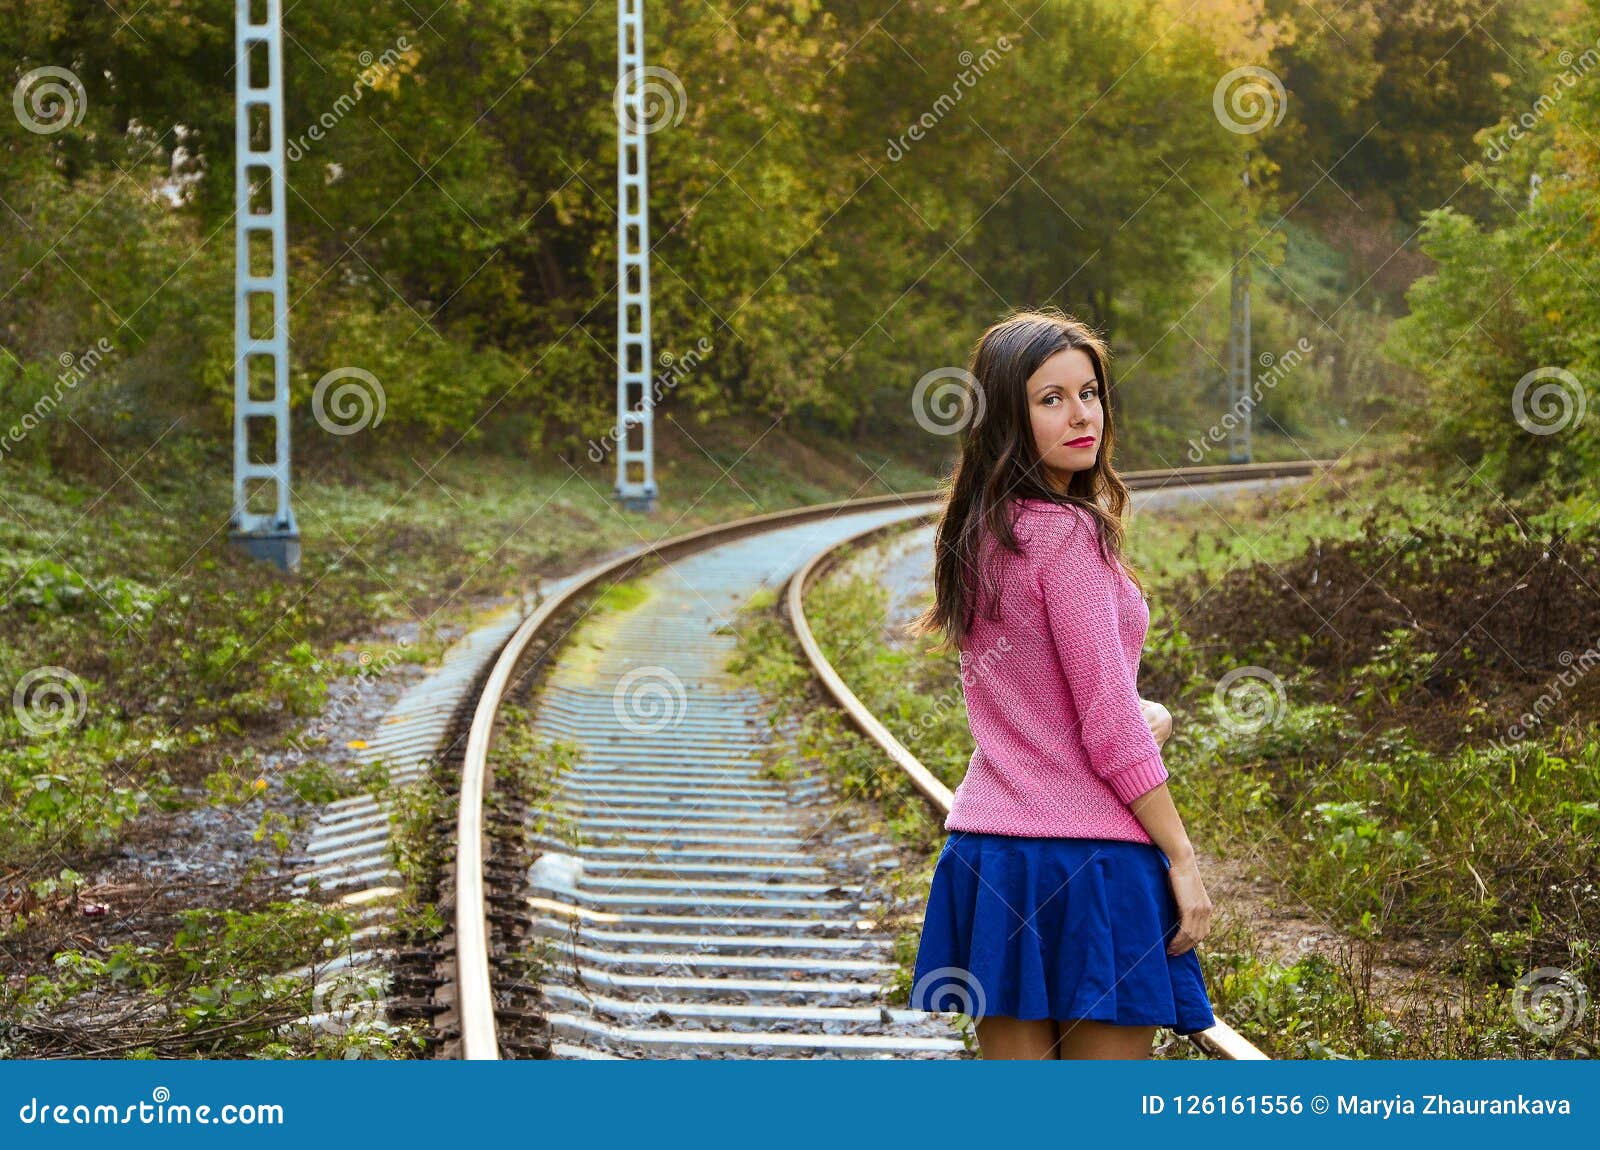 The Colourful Portrait of the Girl on the Rails. Stock Photo - Image of ...